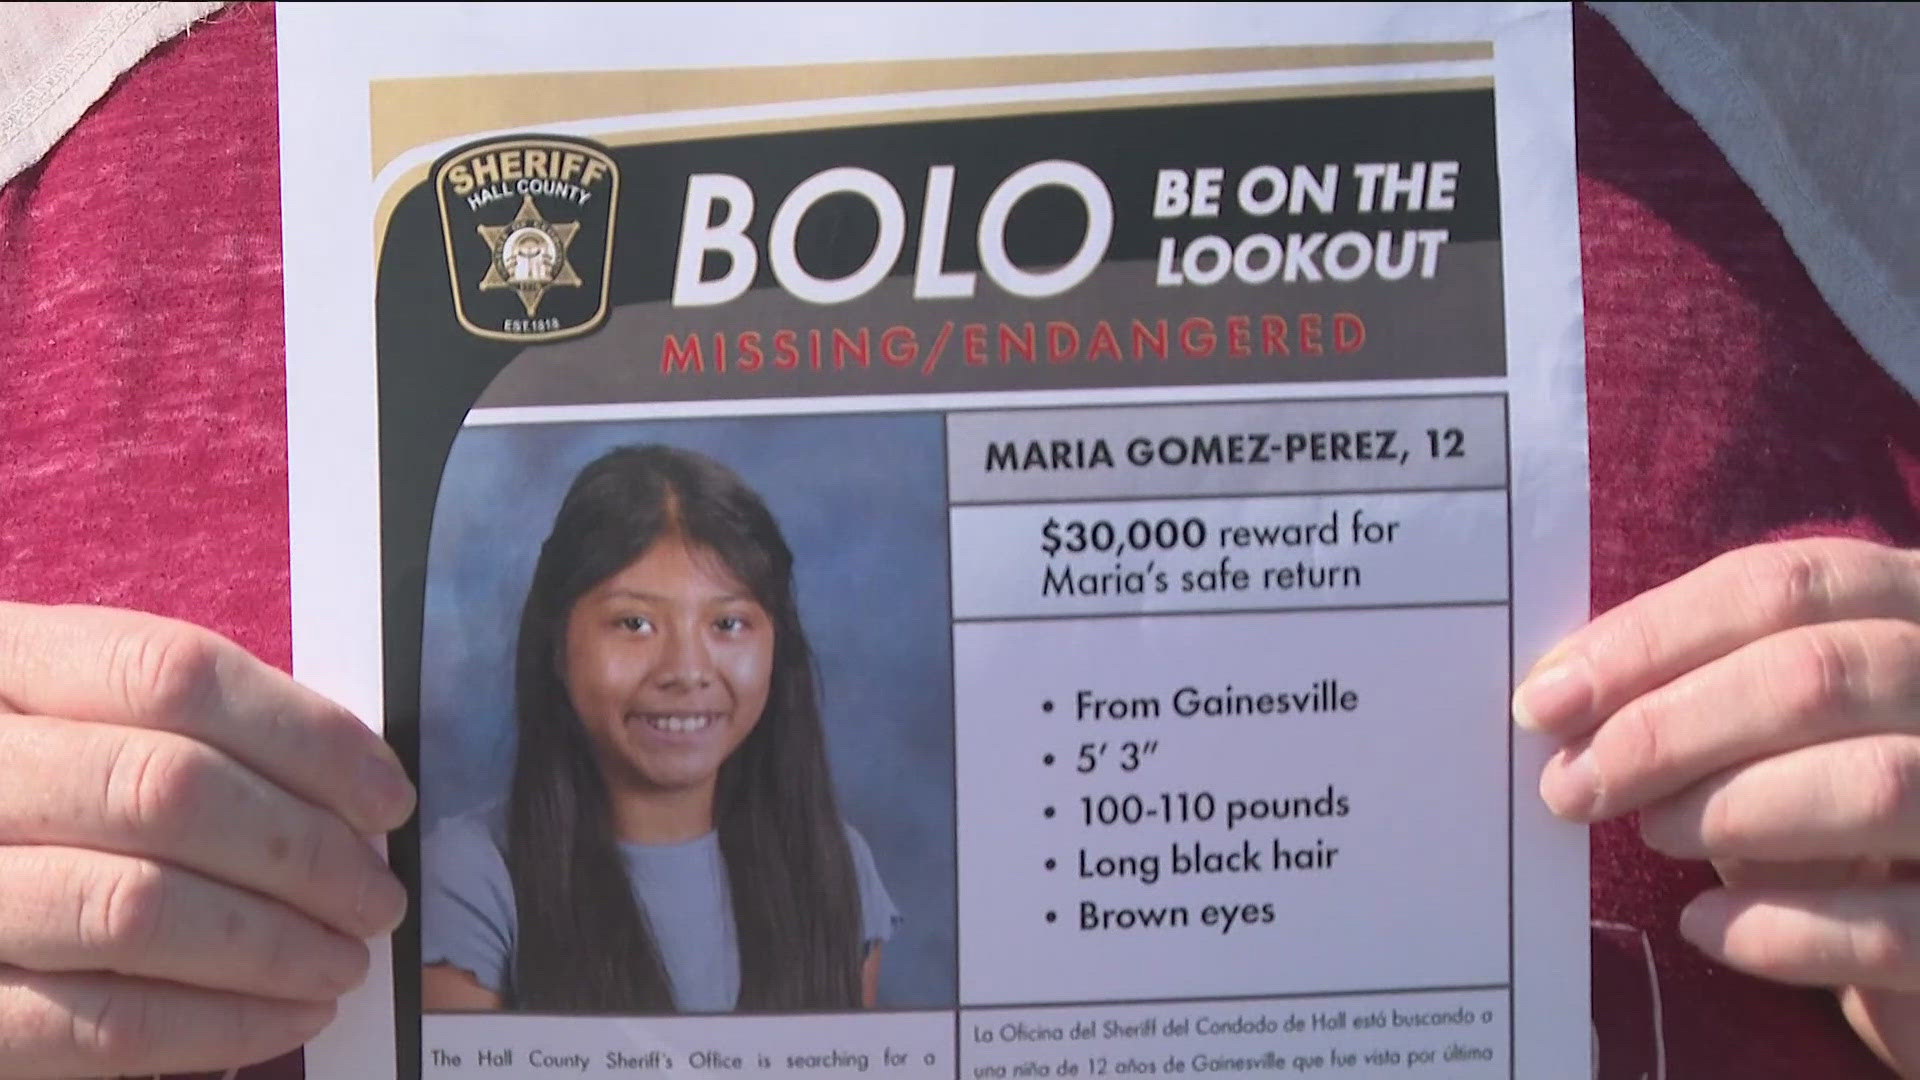 There is a $30,000 reward for her safe return.